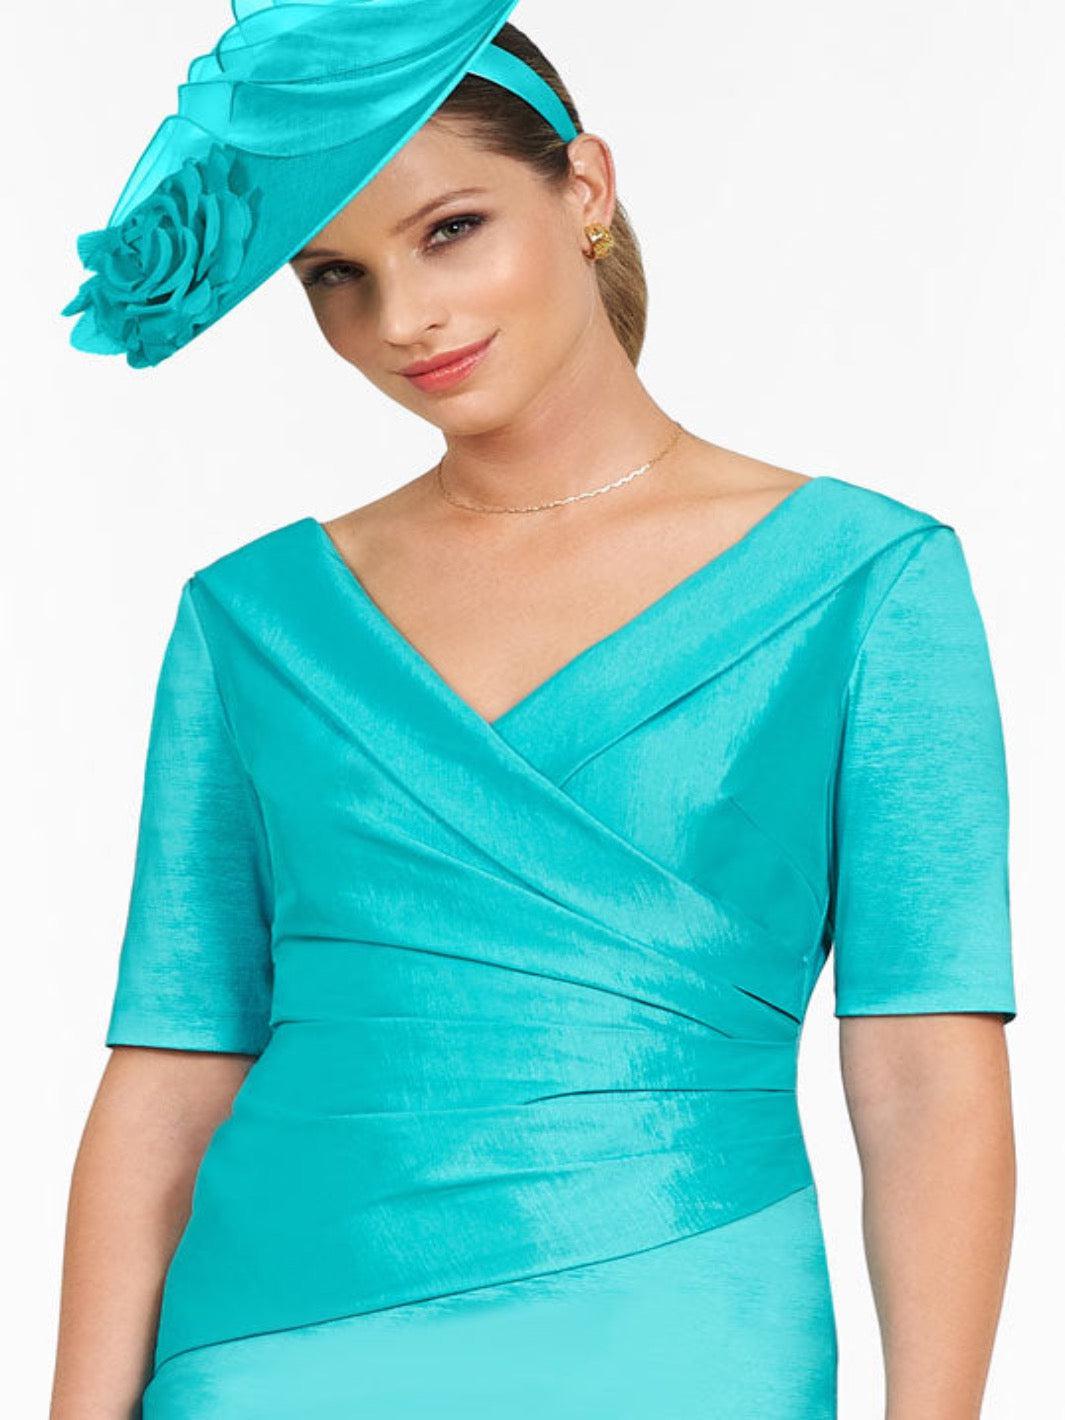 Ispirato Dress In Verdant ISL821-Mother of the bride- mother of the groom -Nicola Ross